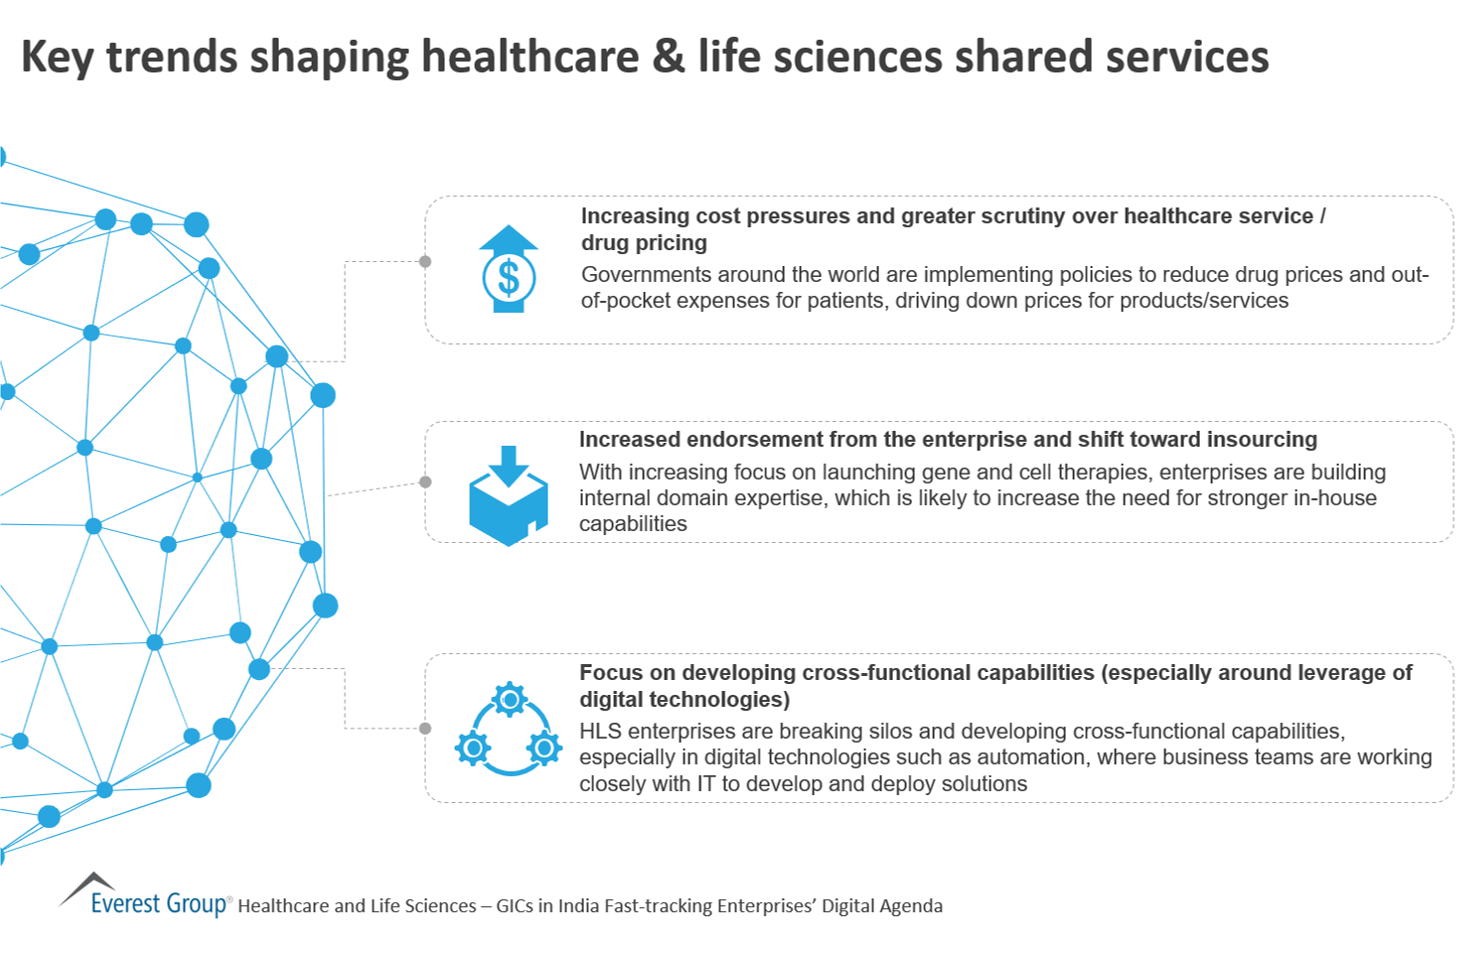 Key trends shaping healthcare & life sciences shared services